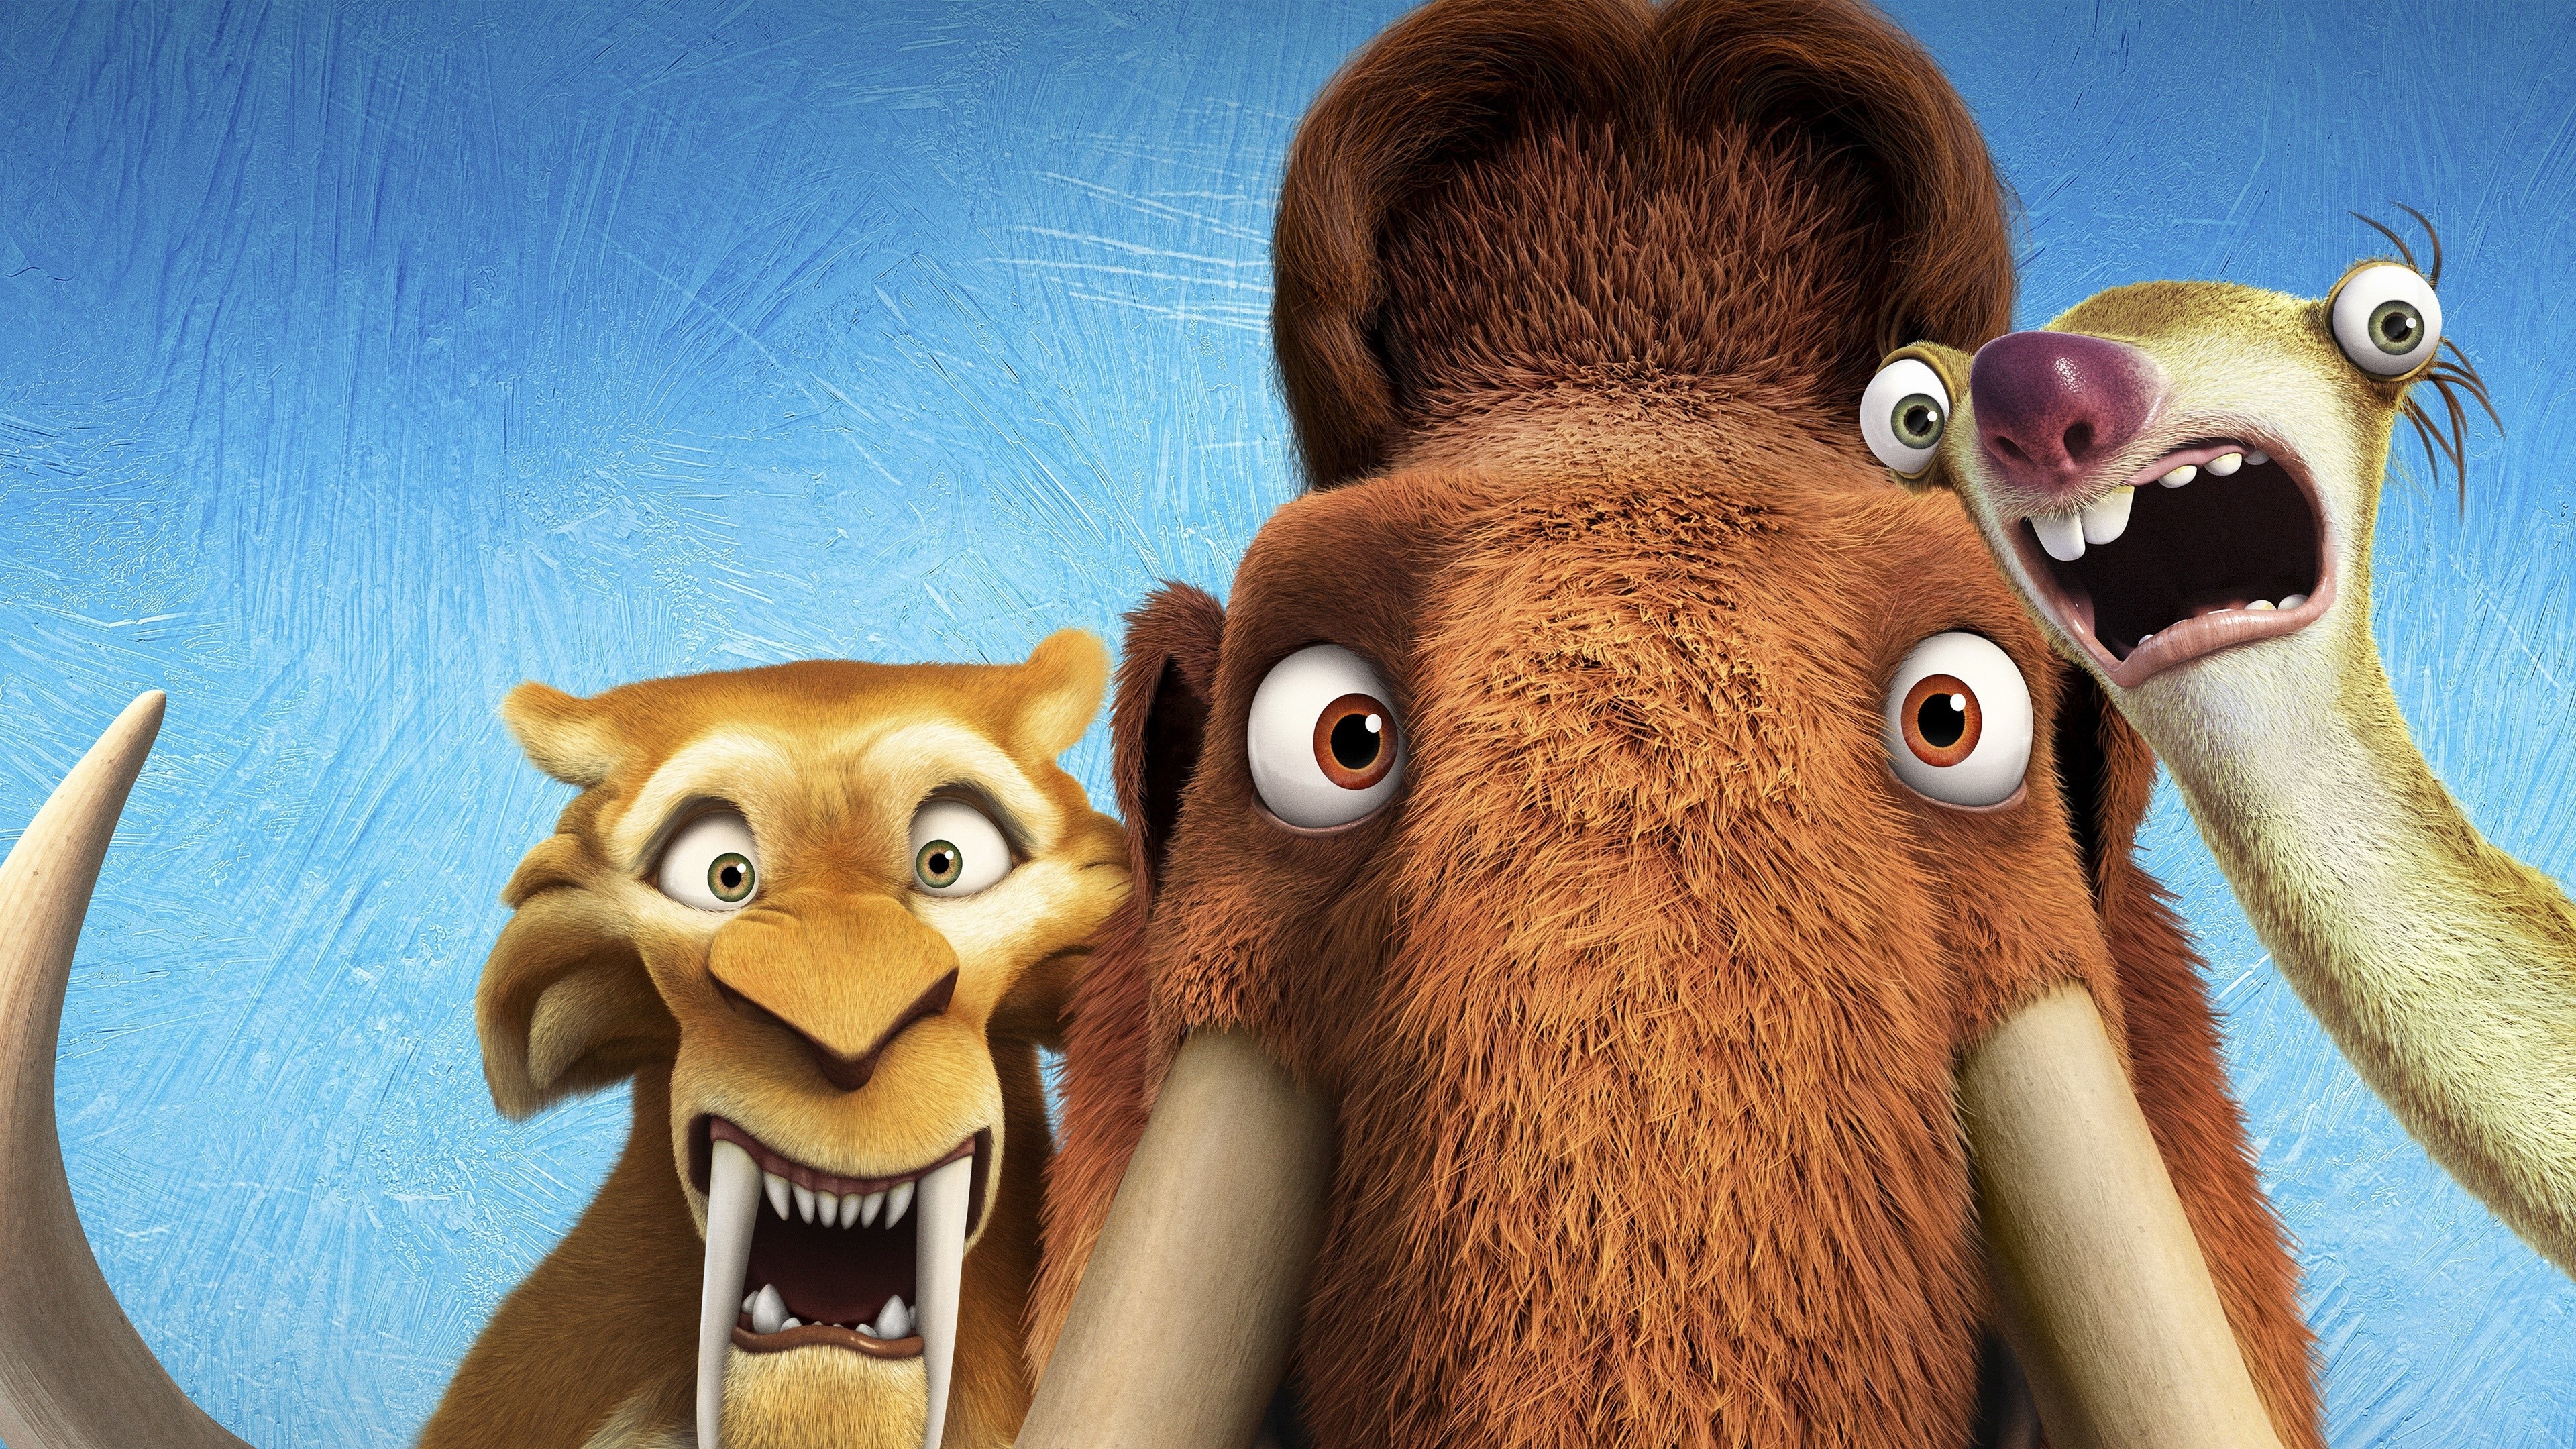 Ice Age 5 collision course, Diego and Manny, Scrat and Sid, Best animations of 2016, 3840x2160 4K Desktop